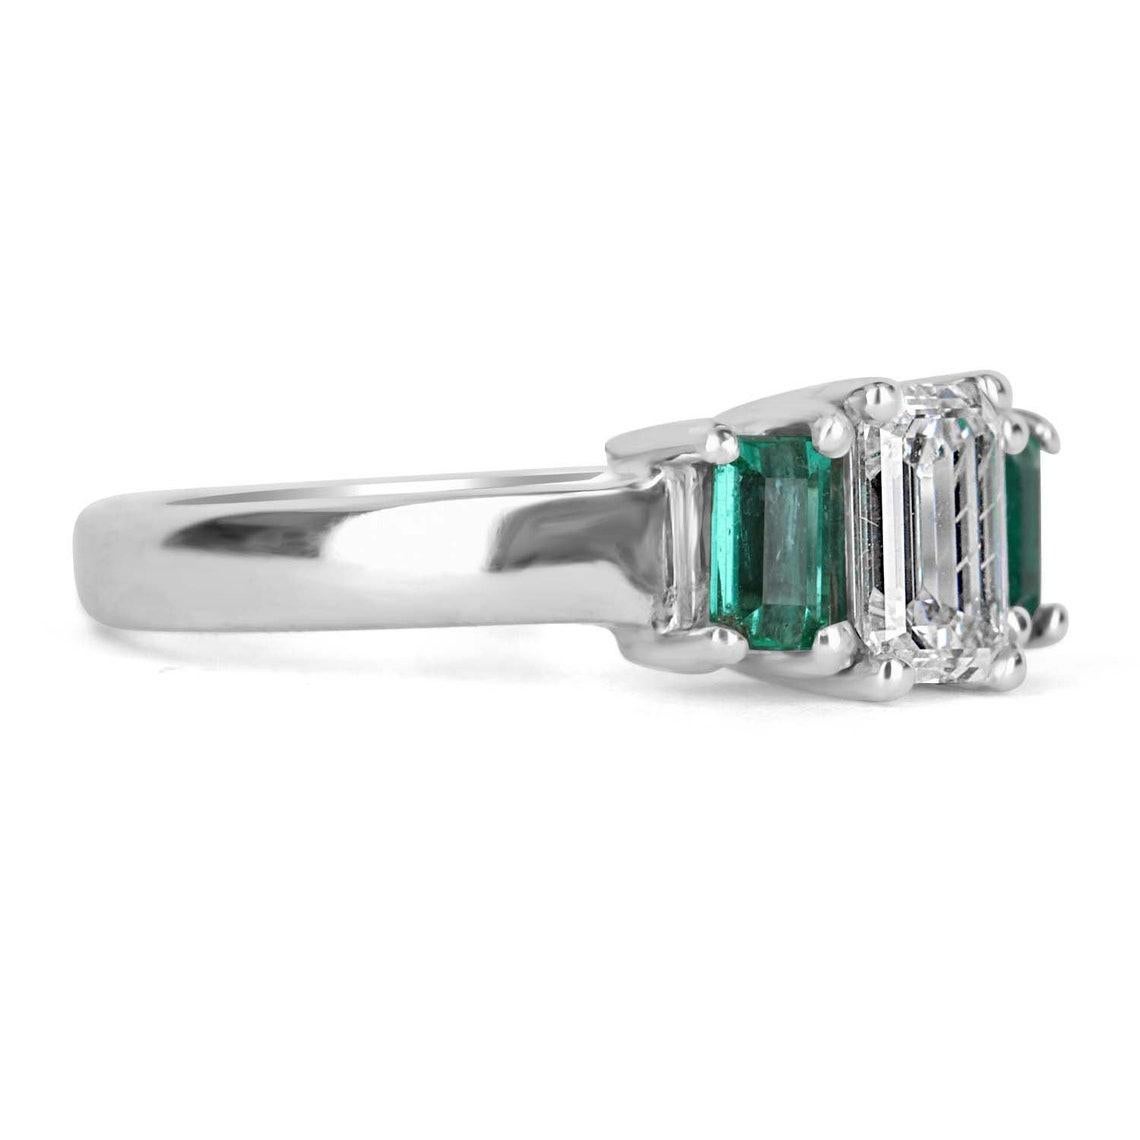 A diamond and Colombian emerald three stone engagement or right-hand ring. An extraordinary custom-created ring. Designed and created by our own master jeweler, 